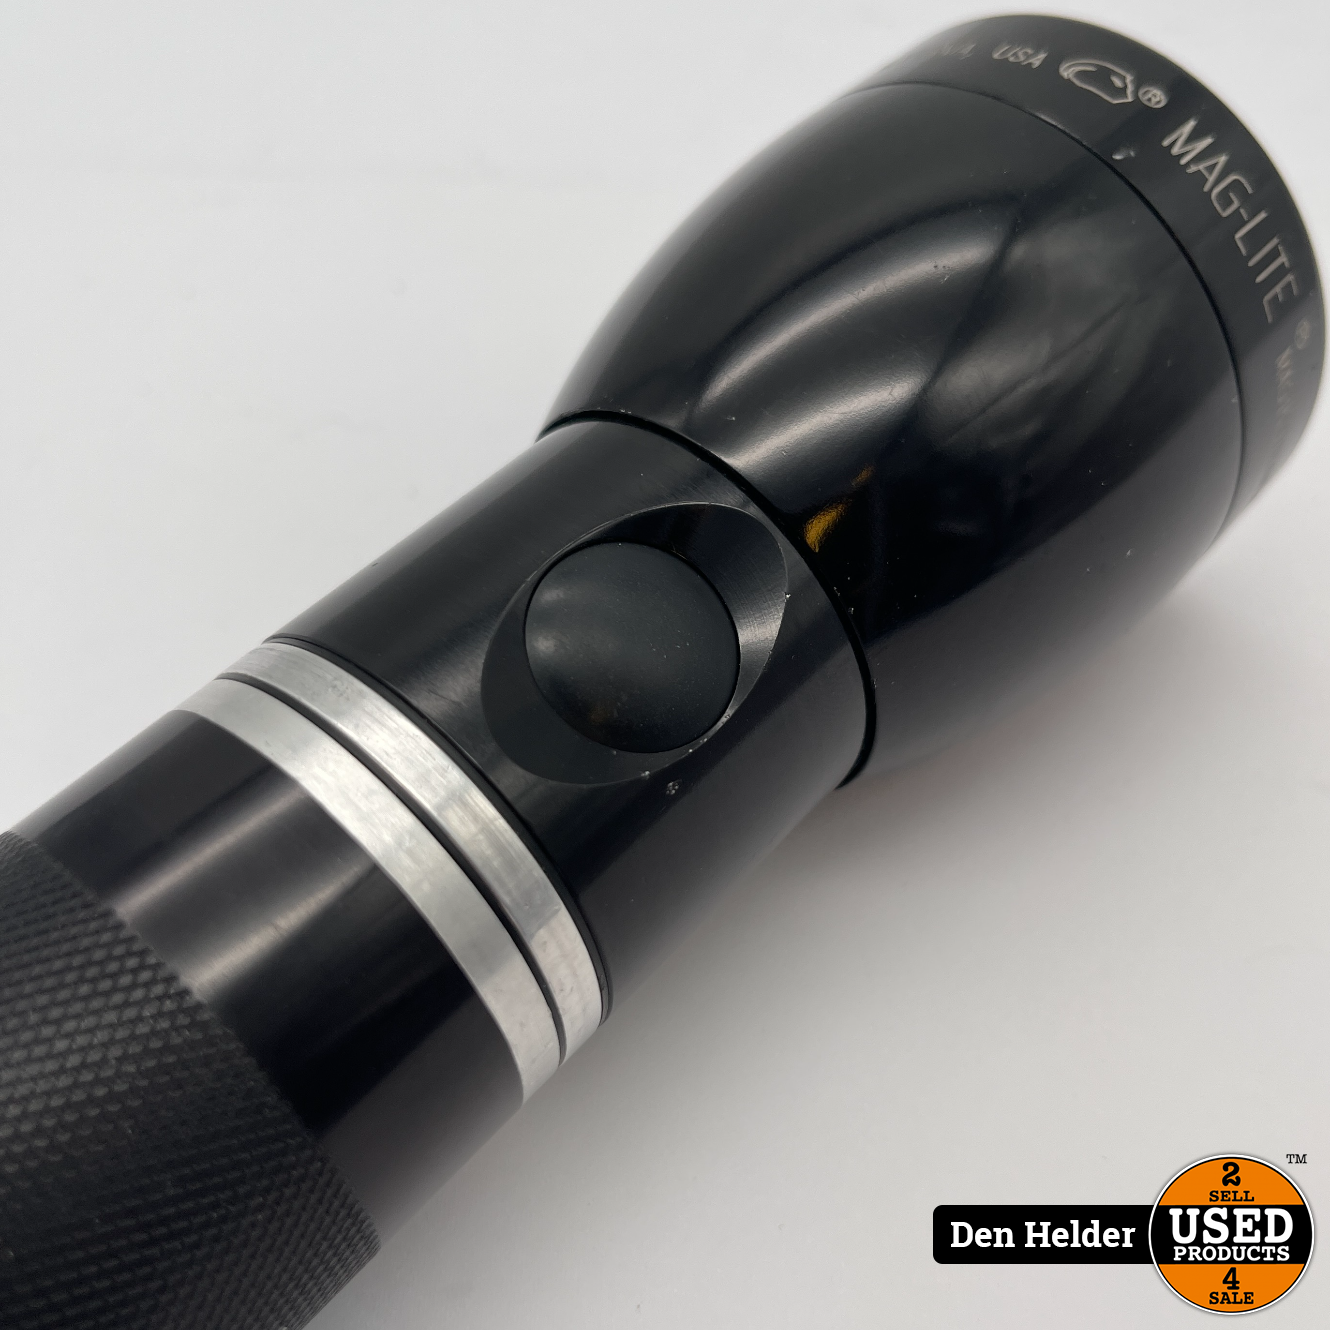 Maglite Staaflamp - In Goede Staat - Used Products Den